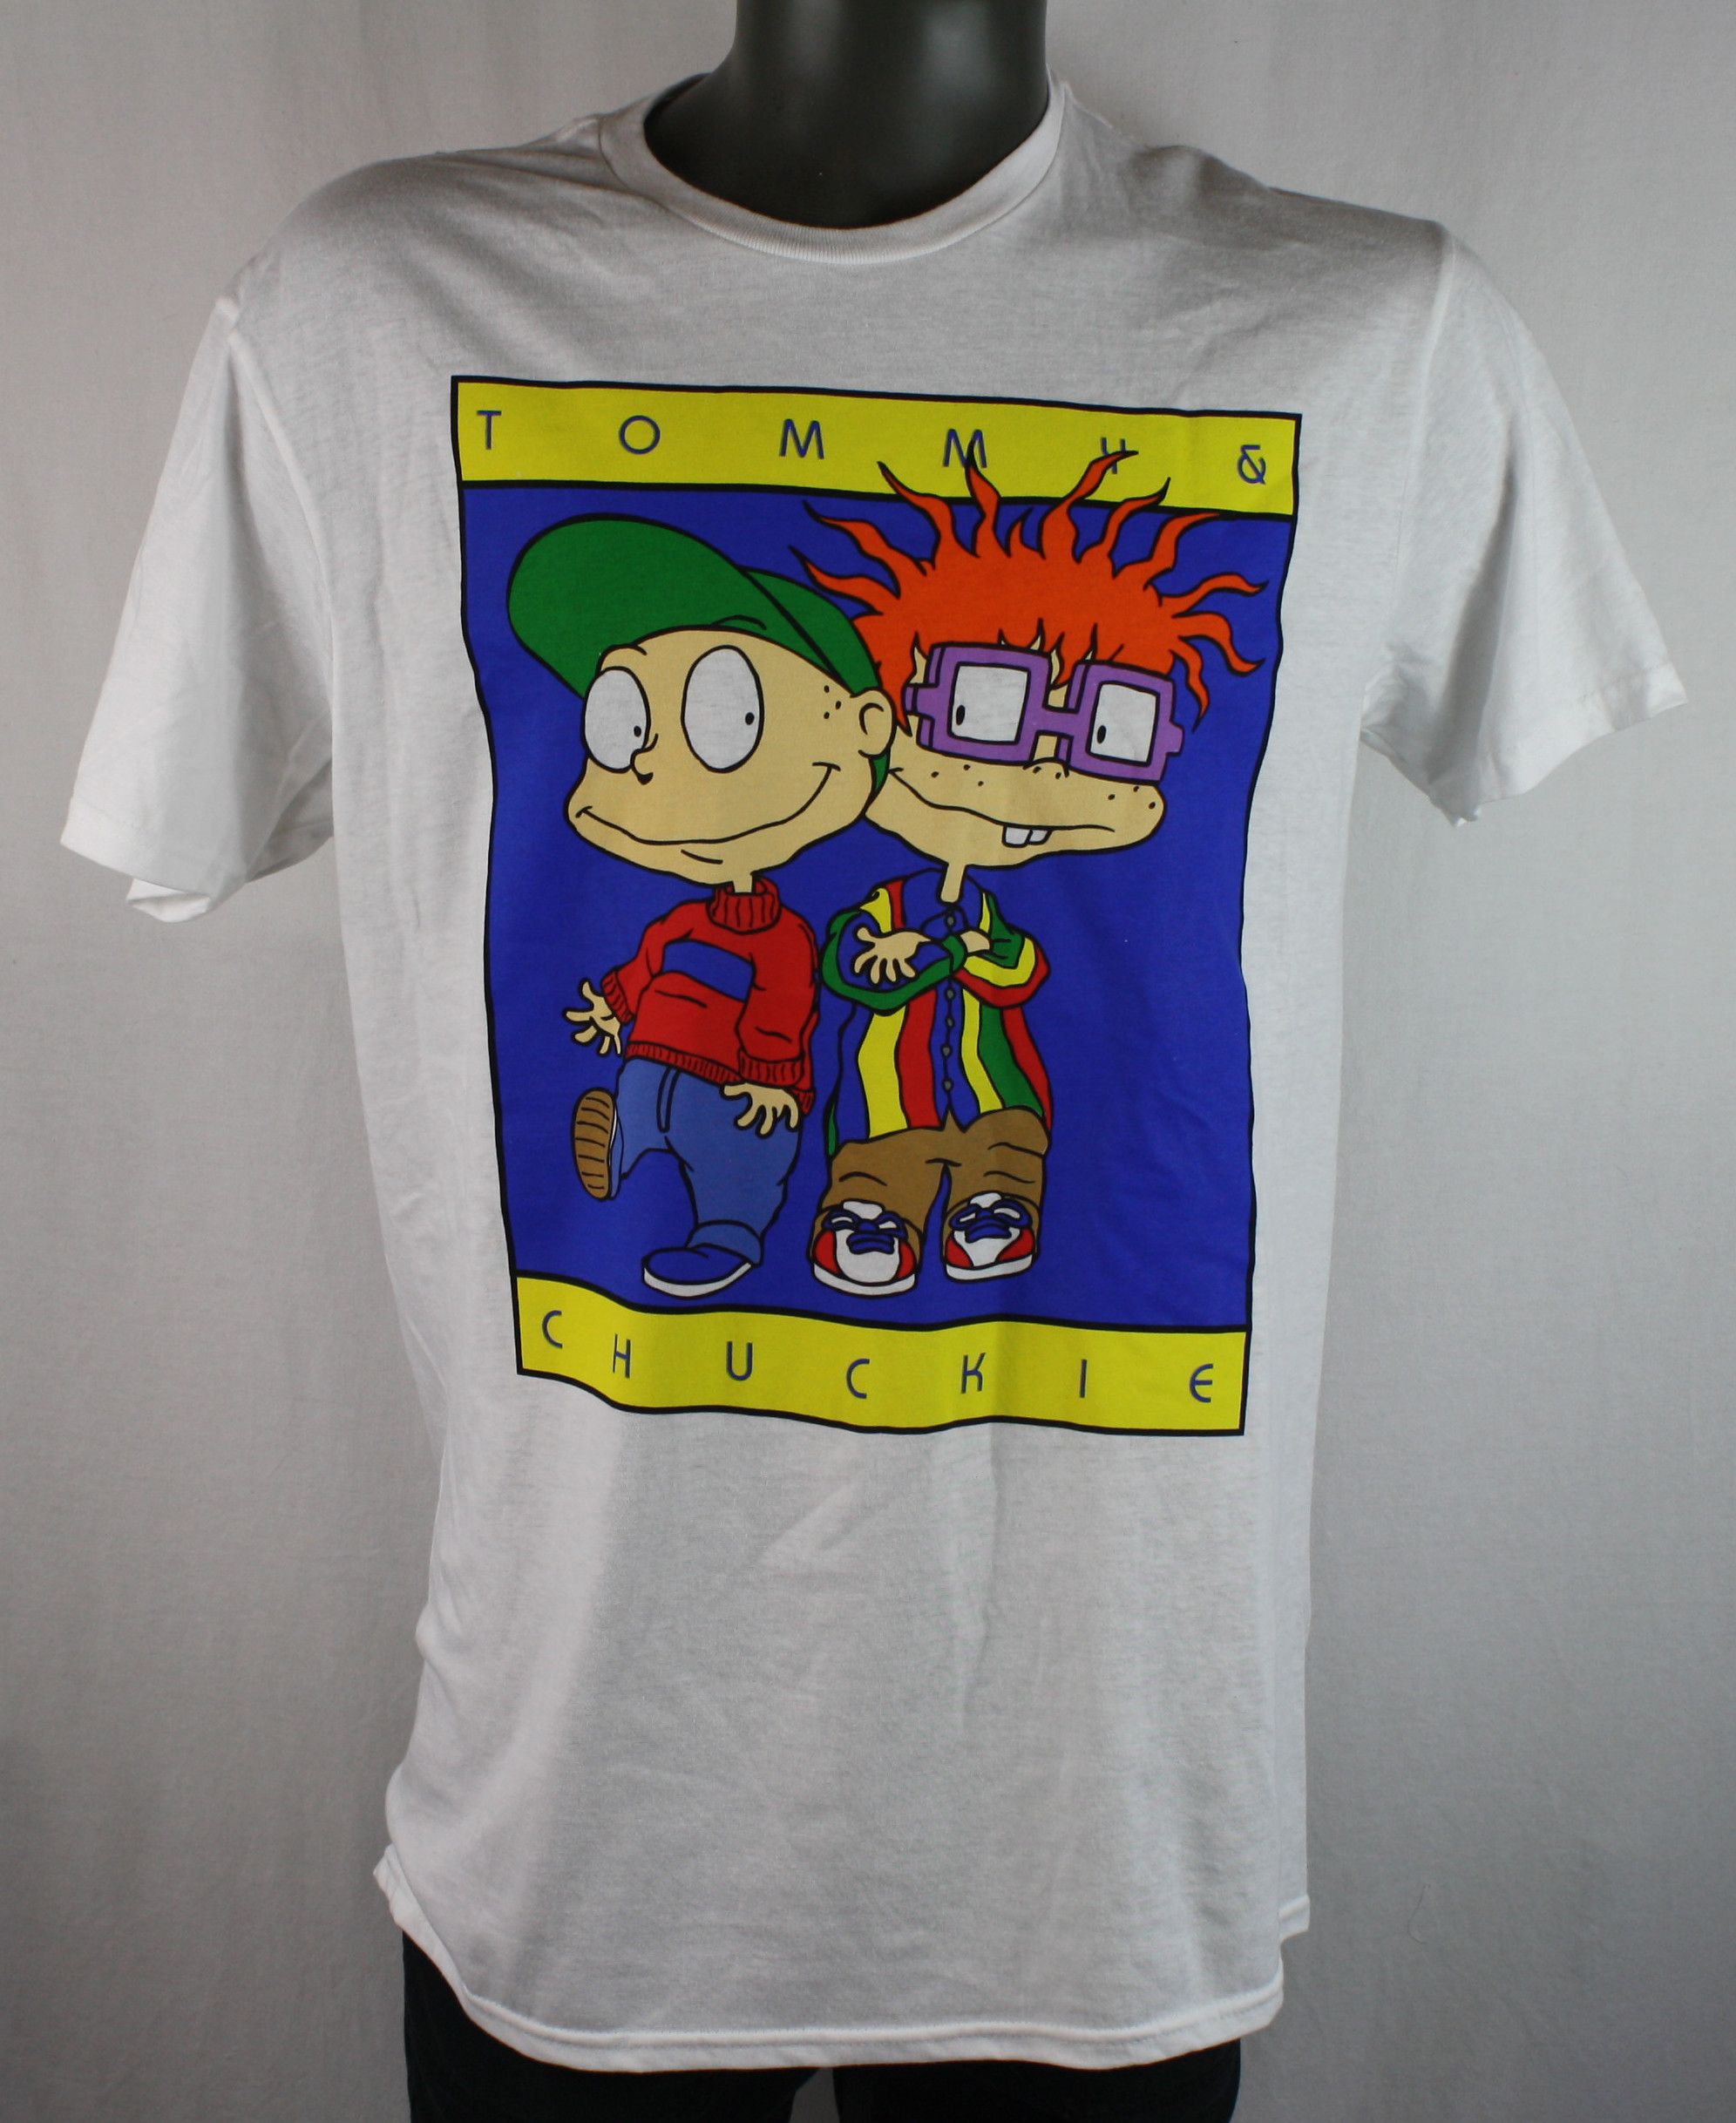 Vintage NEW Rugrats Tommy Hilfiger Style Vintage Throwback T-Shirt Size US S / EU 44-46 / 1 - 1 Preview